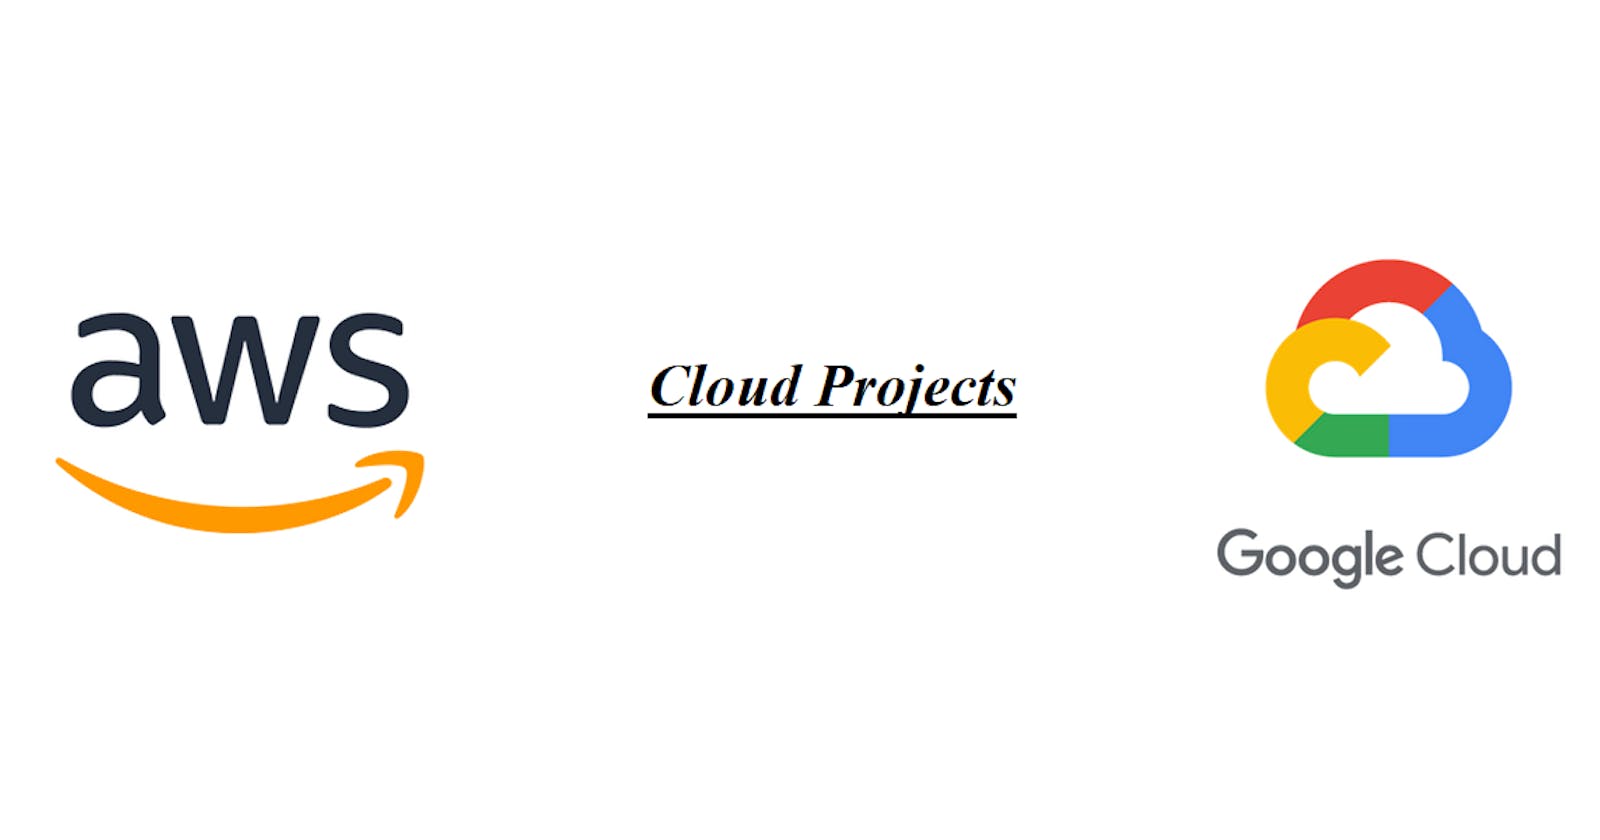 Cloud Projects